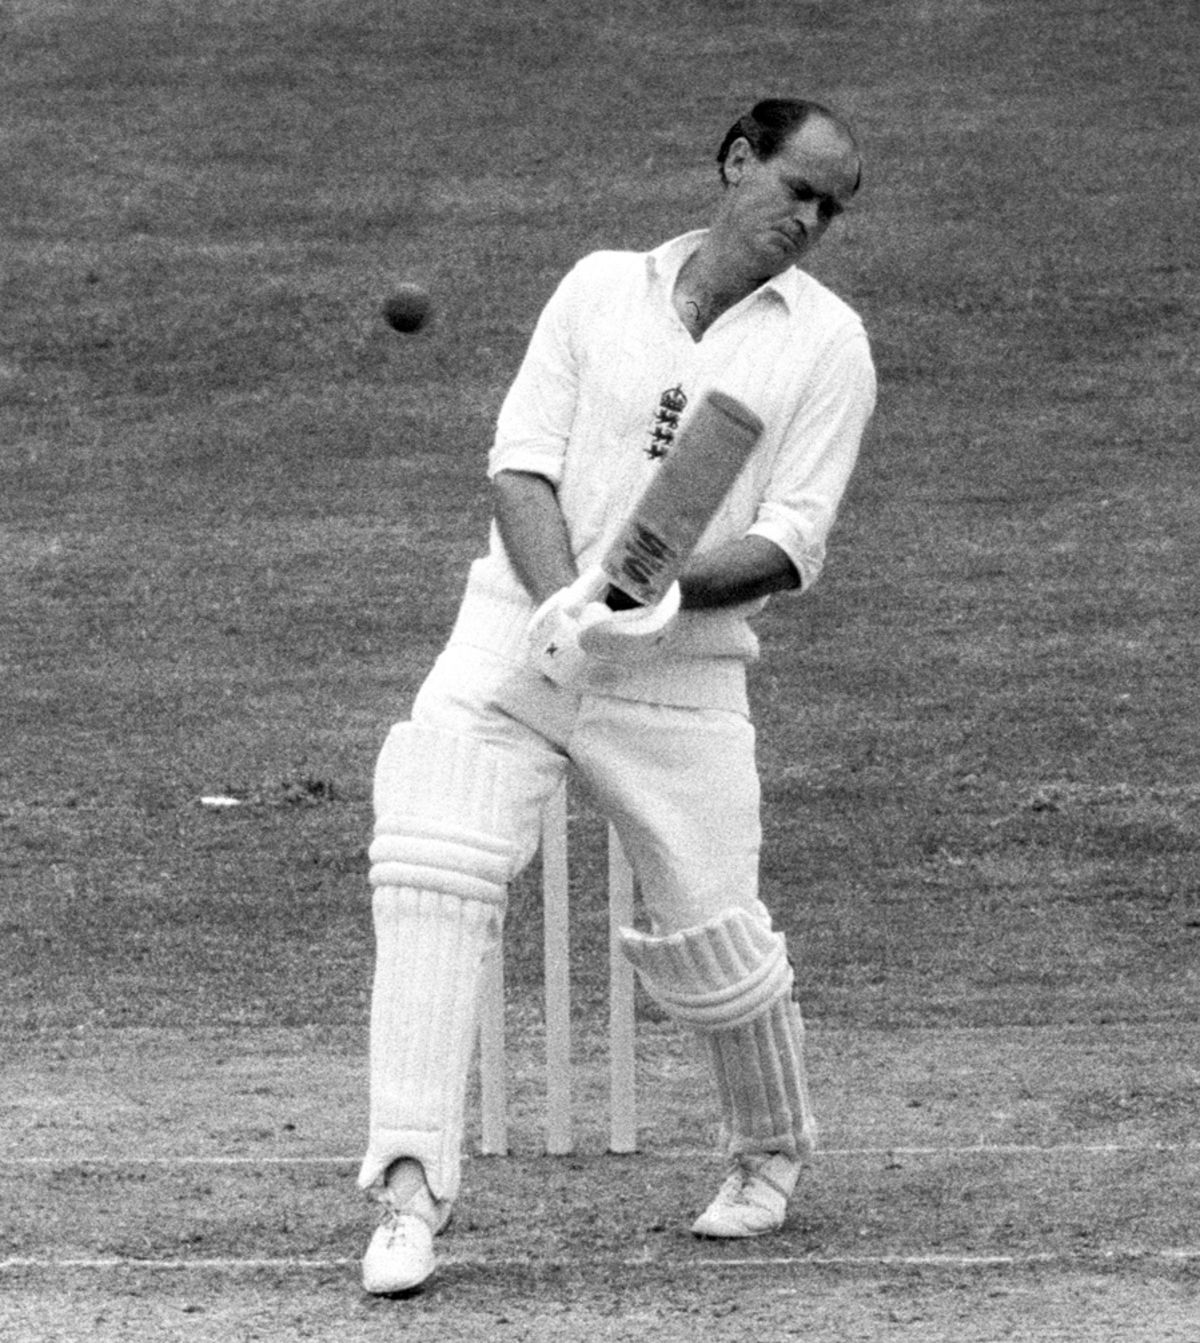 Brian Close avoids a short ball from Michael Holding, England v West Indies, 2nd Test, Lord's, 1st day, June 17, 1976